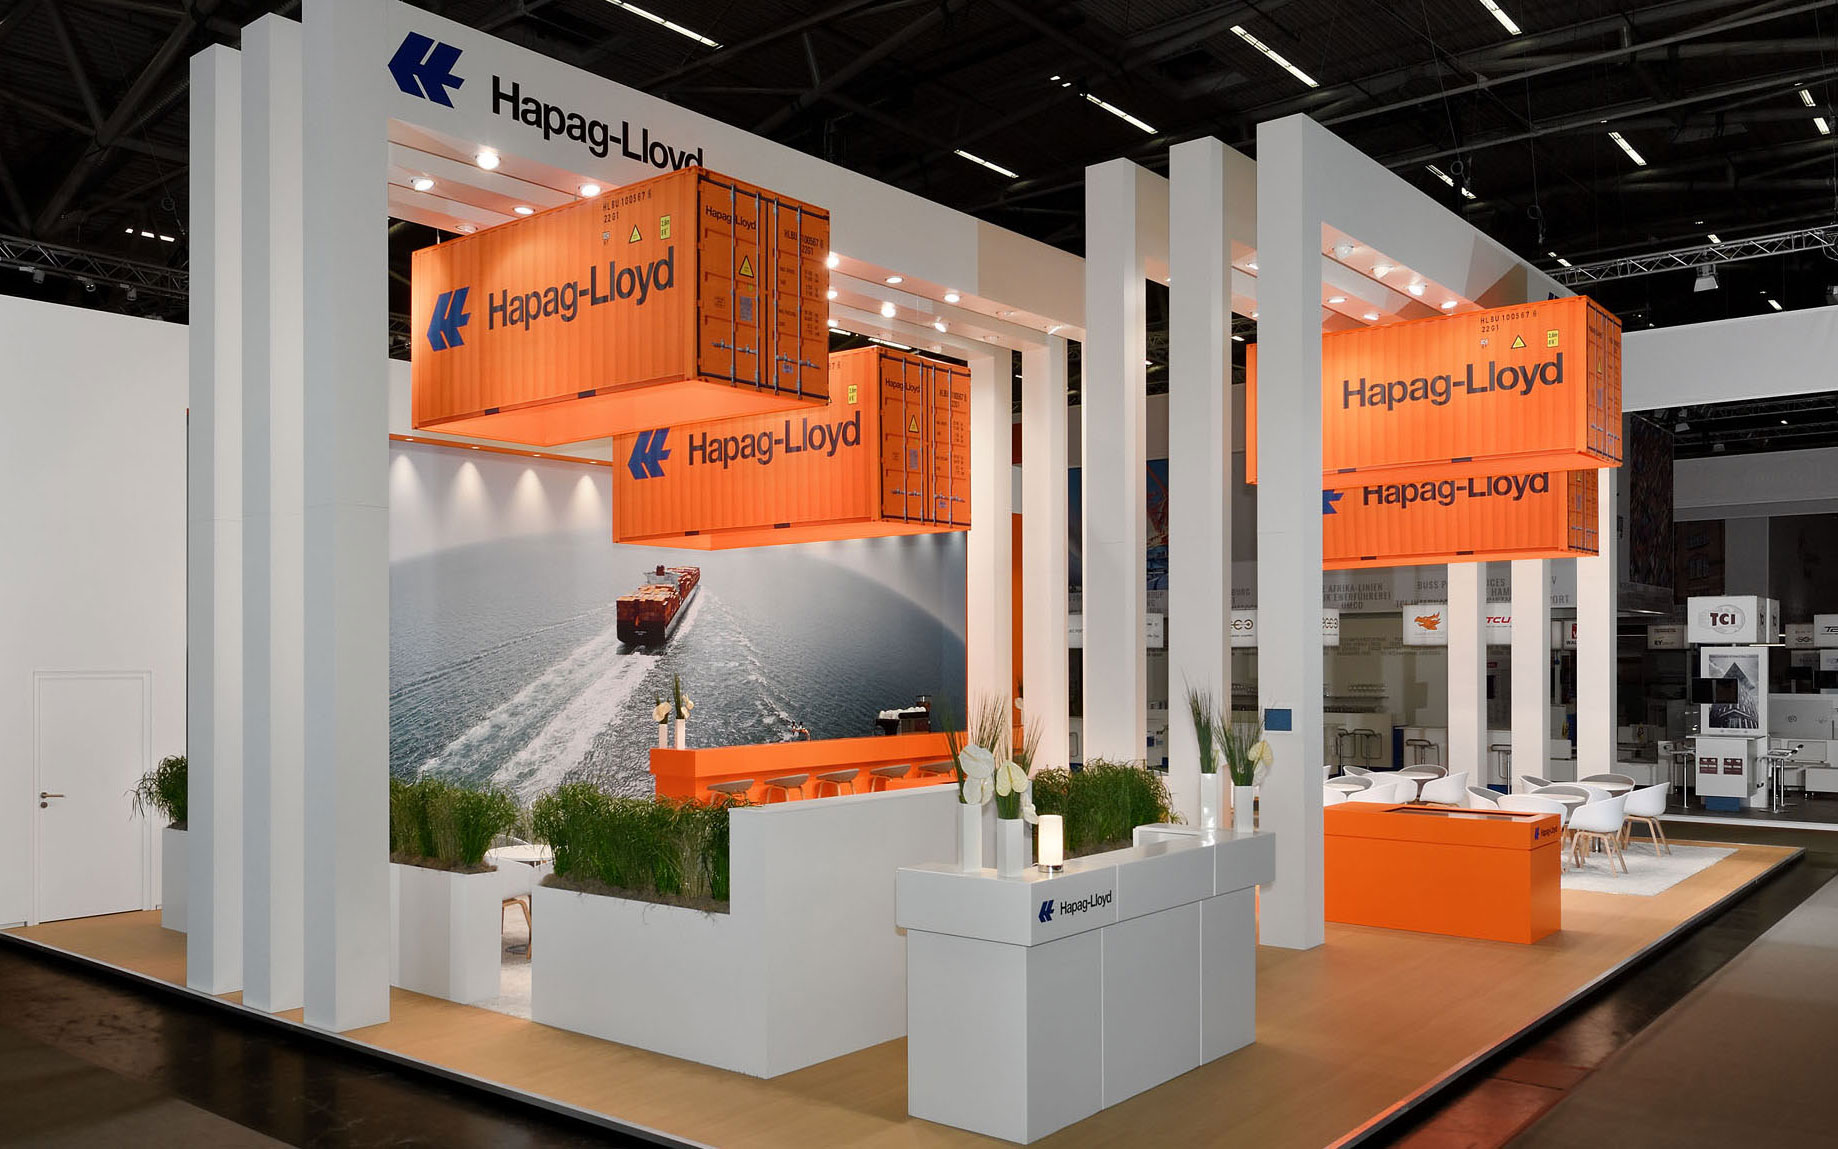 Stand builder in Munich at Transport-Logistic responsible for Hapag-Lloyd's stand with own design by DIXConcepts